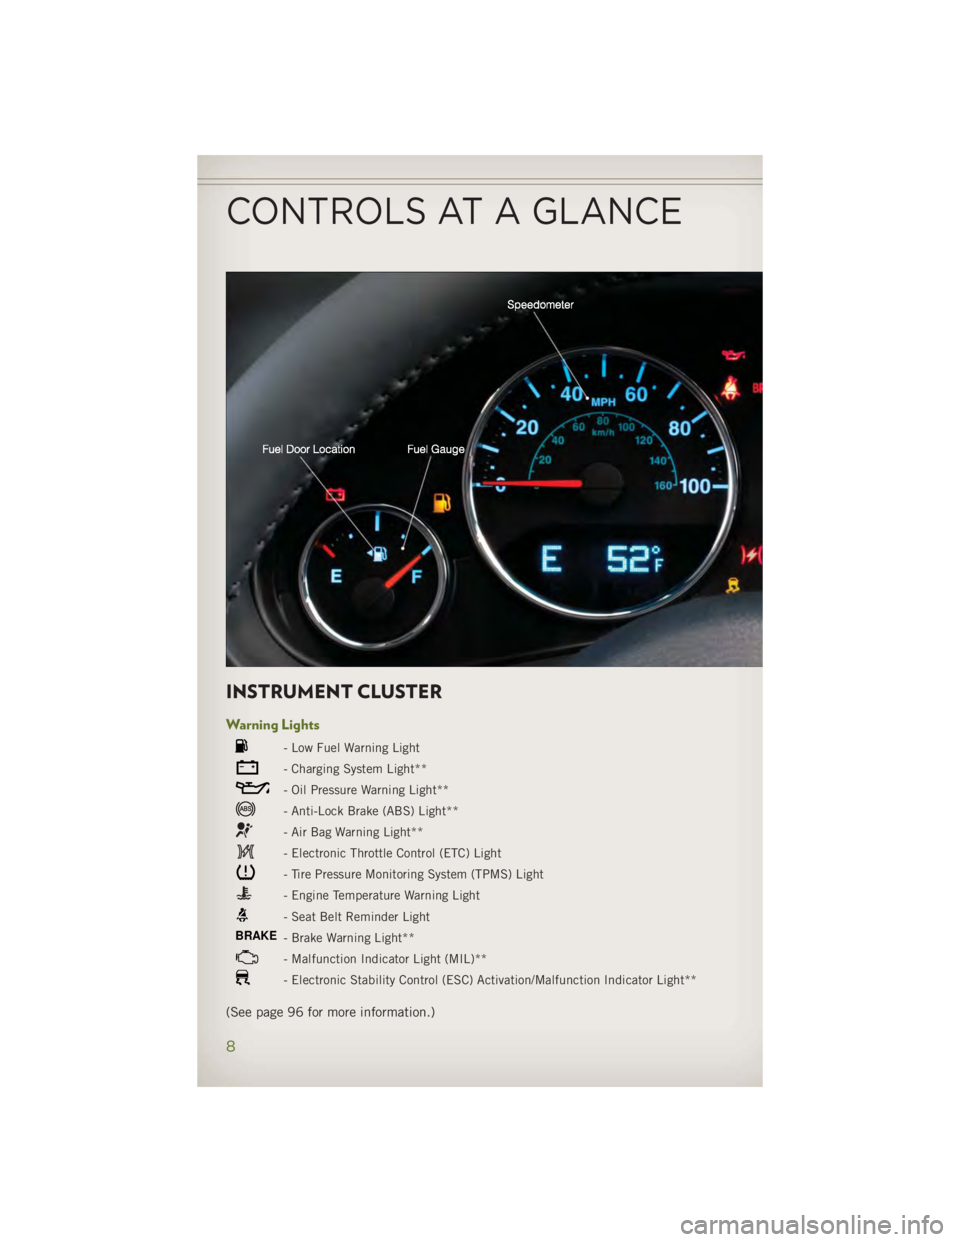 JEEP WRANGLER UNLIMITED 2014  Owners Manual INSTRUMENT CLUSTER Warning Lights - Low Fuel Warning Light
- Charging System Light**
- Oil Pressure Warning Light**
- Anti-Lock Brake (ABS) Light**
- Air Bag Warning Light**
- Electronic Throttle Cont